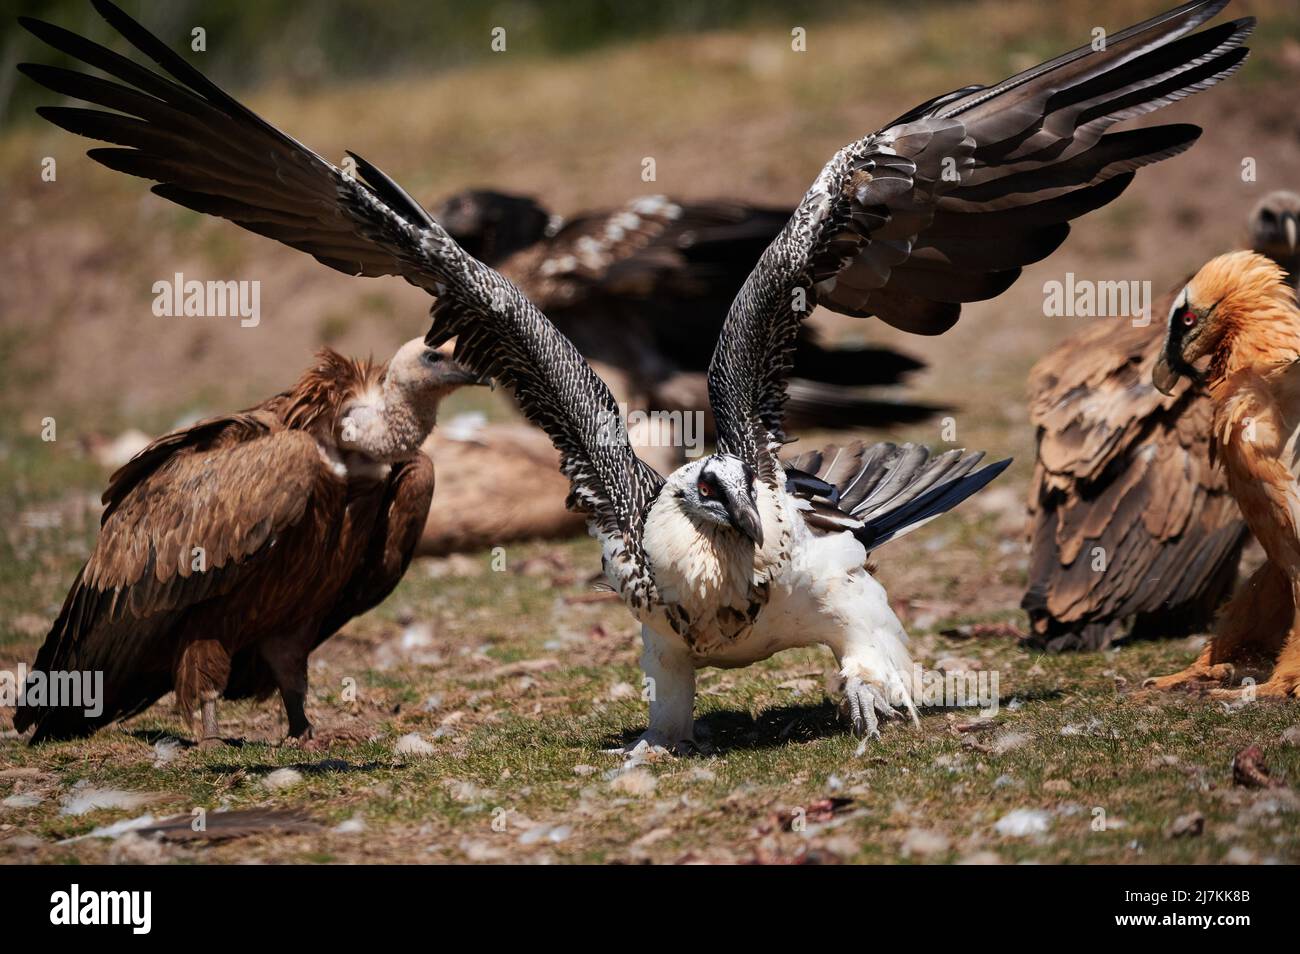 Wild bearded vulture spreading wings and doing aggressive moves towards other birds in flock on grassy hill in daytime Stock Photo